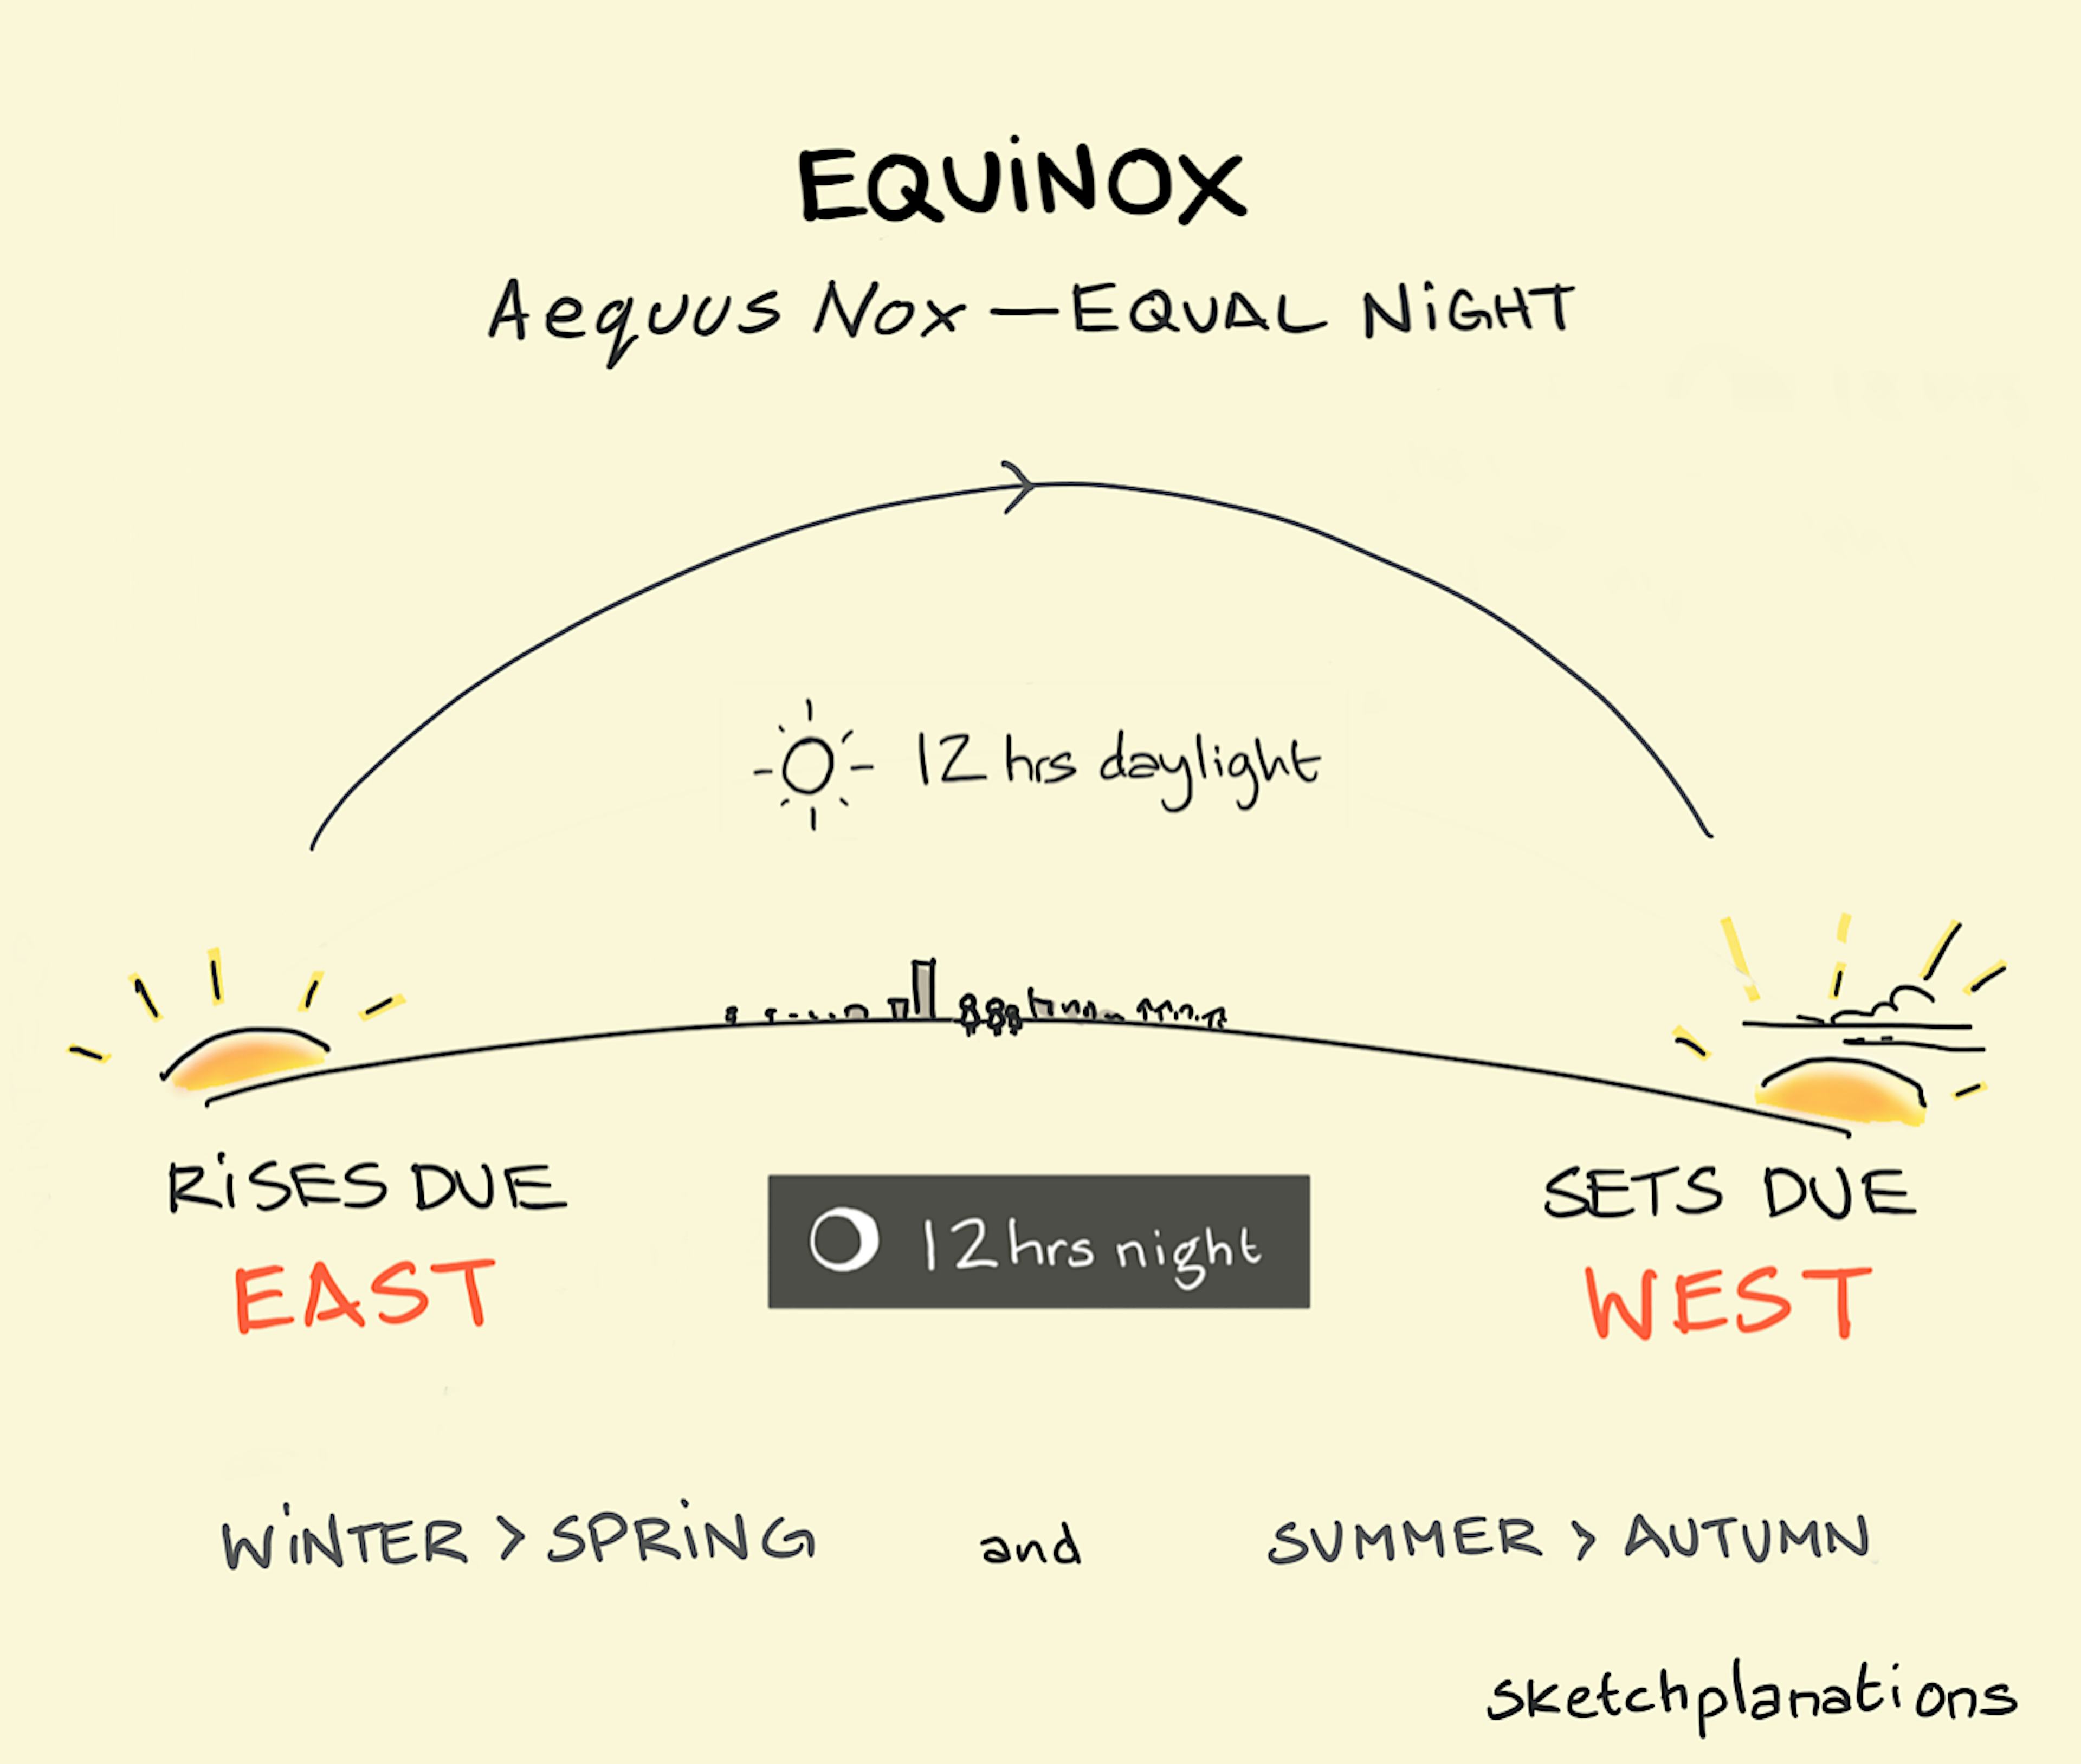 Equinox: meaning equal night, the autumn and spring equinoxes are days where there is an equal amount of daylight as night time. They mark the transitions between seasons